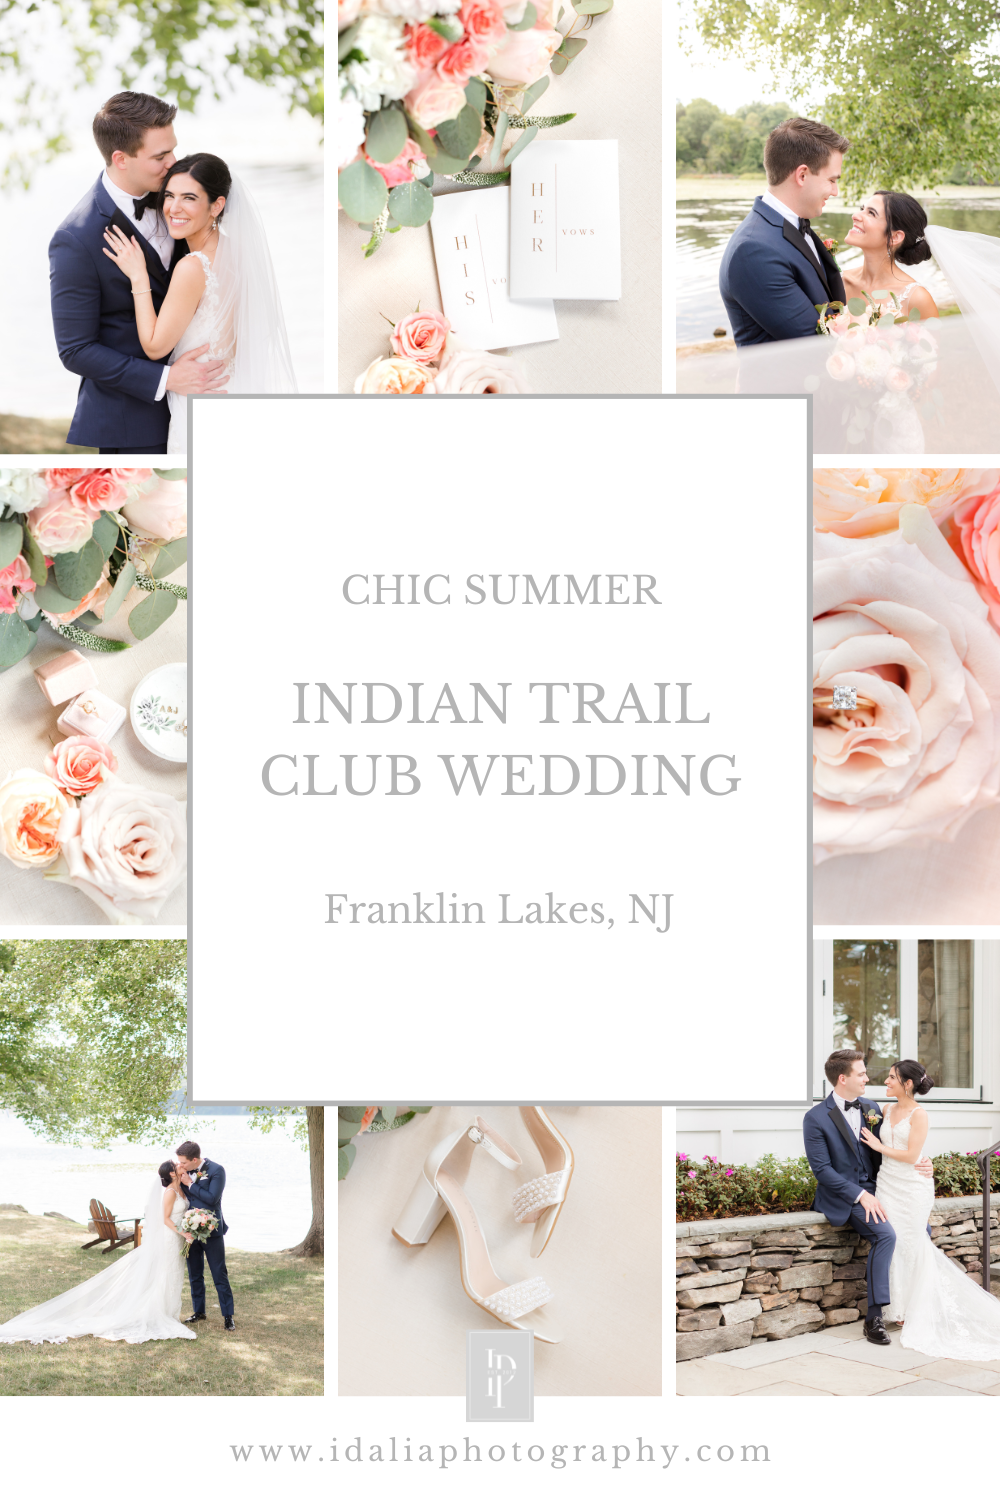 Indian Trail Club wedding day with floral arch for ceremony along the water photographed by NJ wedding photographer Idalia Photography.